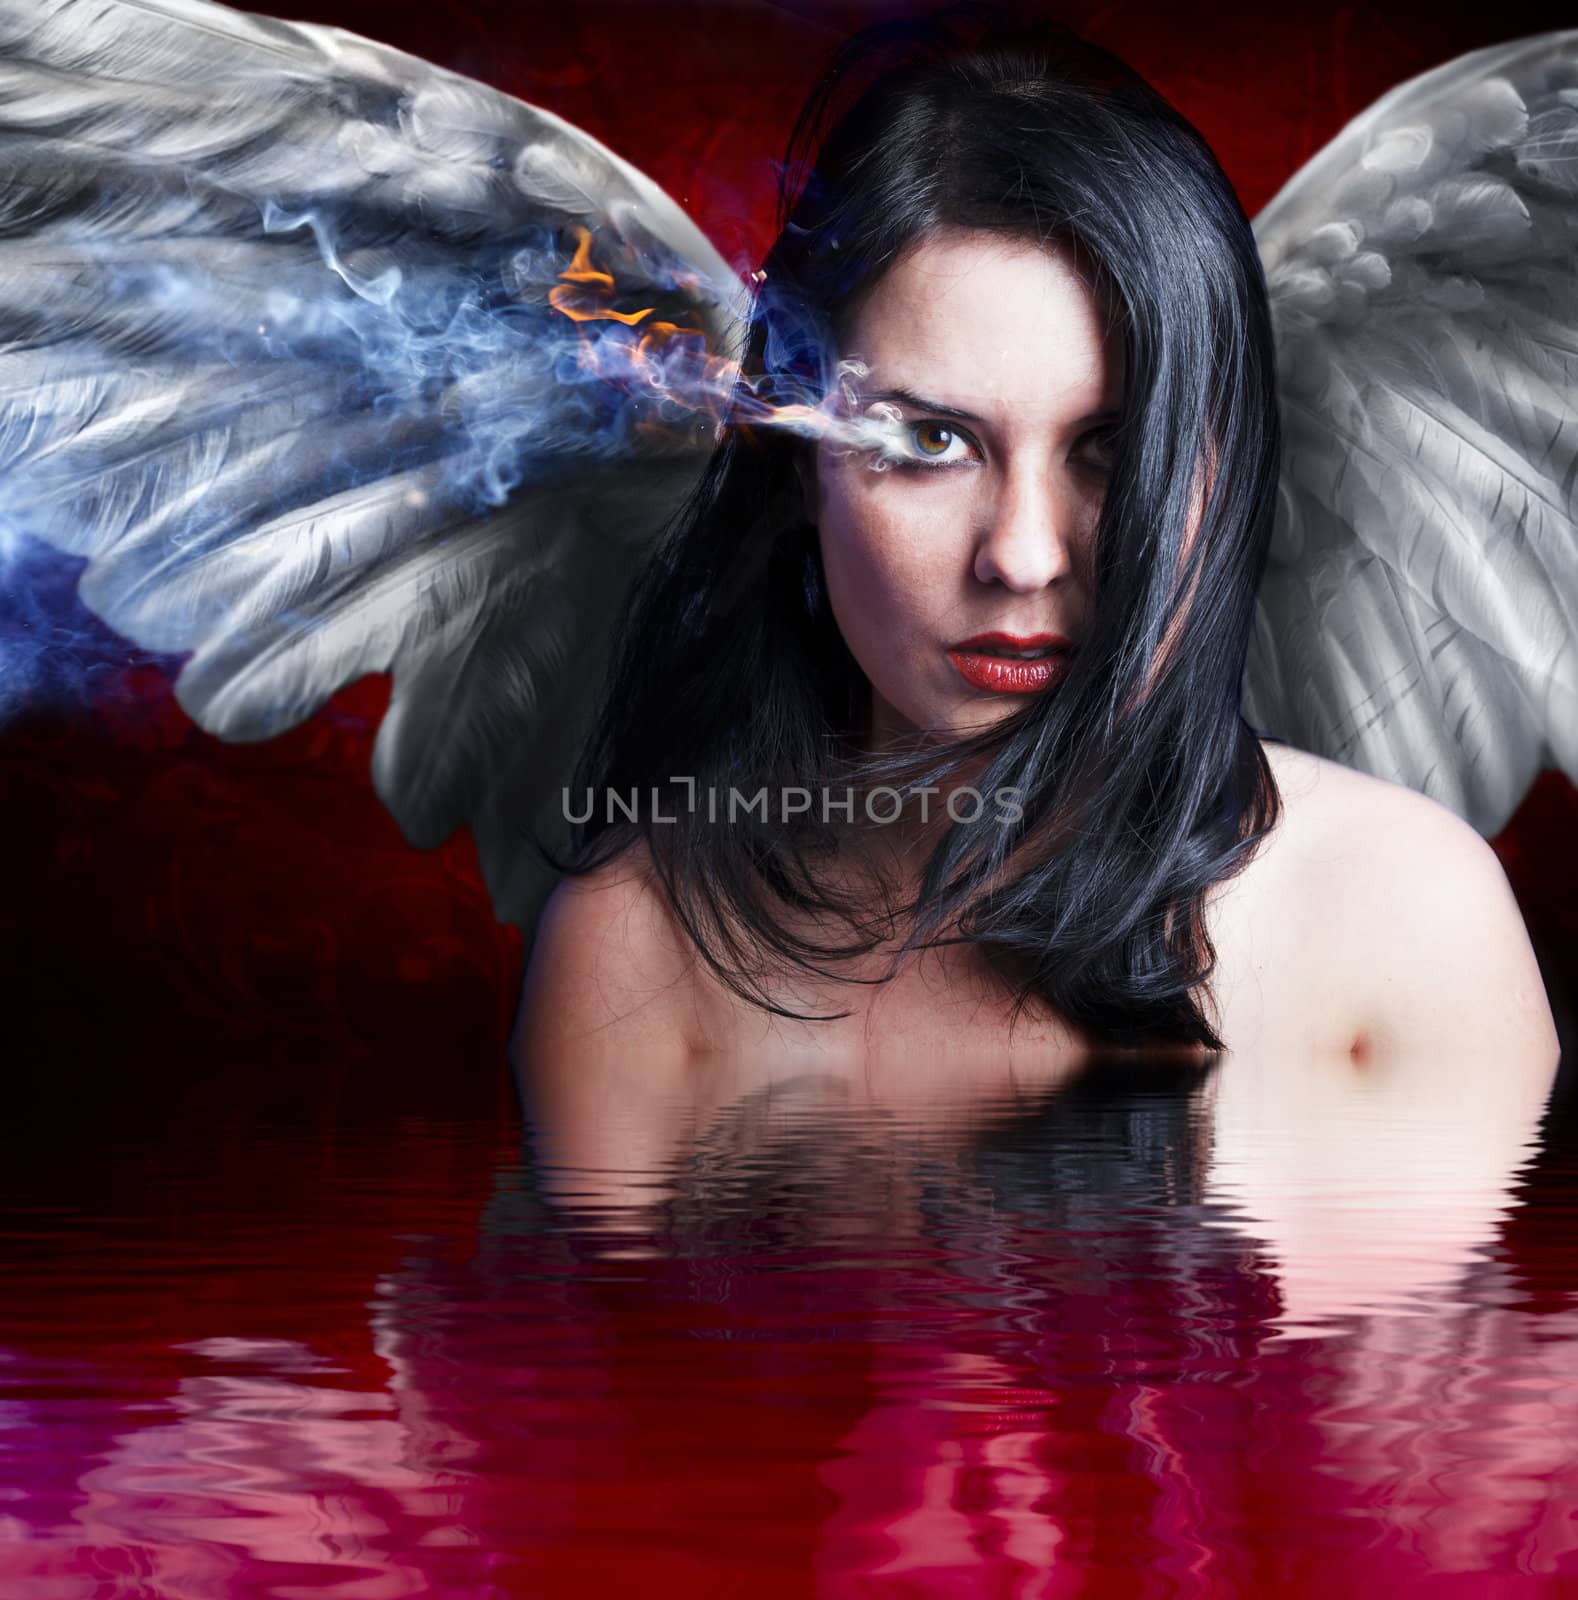 Angel angry, girl with burning eye over blood water reflection by FernandoCortes